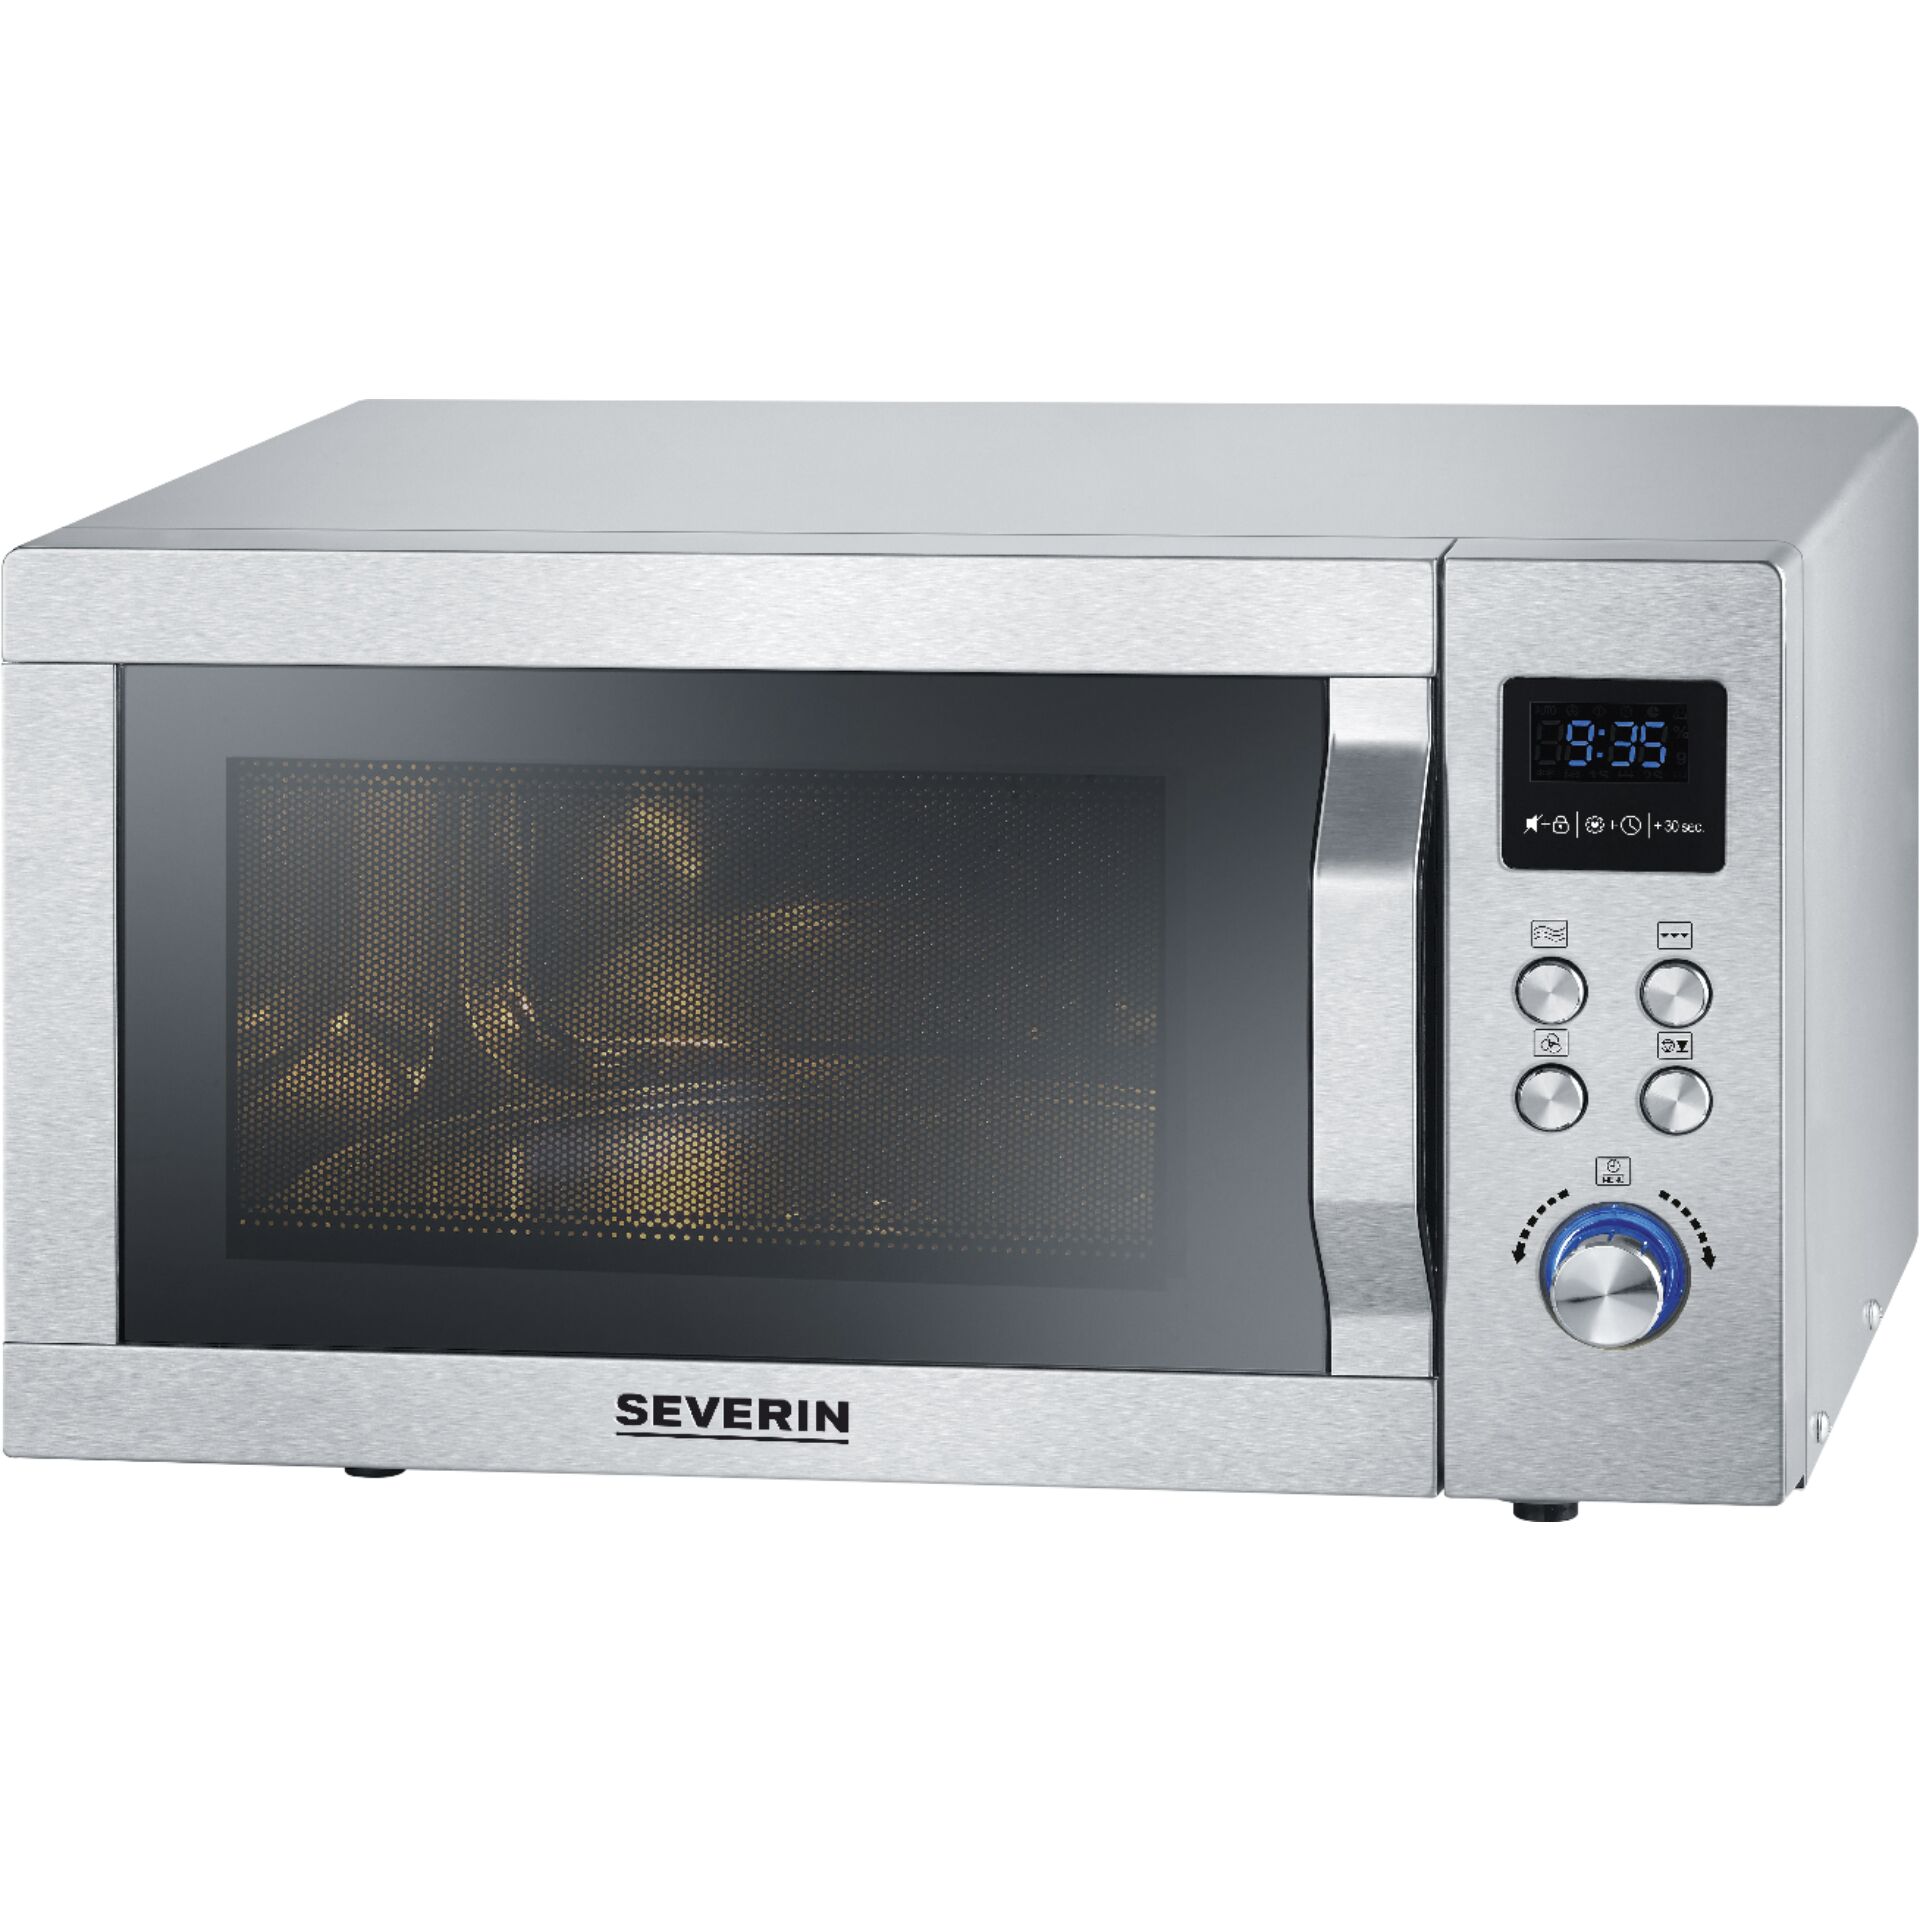 Severin -MW Mikrowelle -Severin 7774 Grill mit 1 in 3 Hardware/Electronic